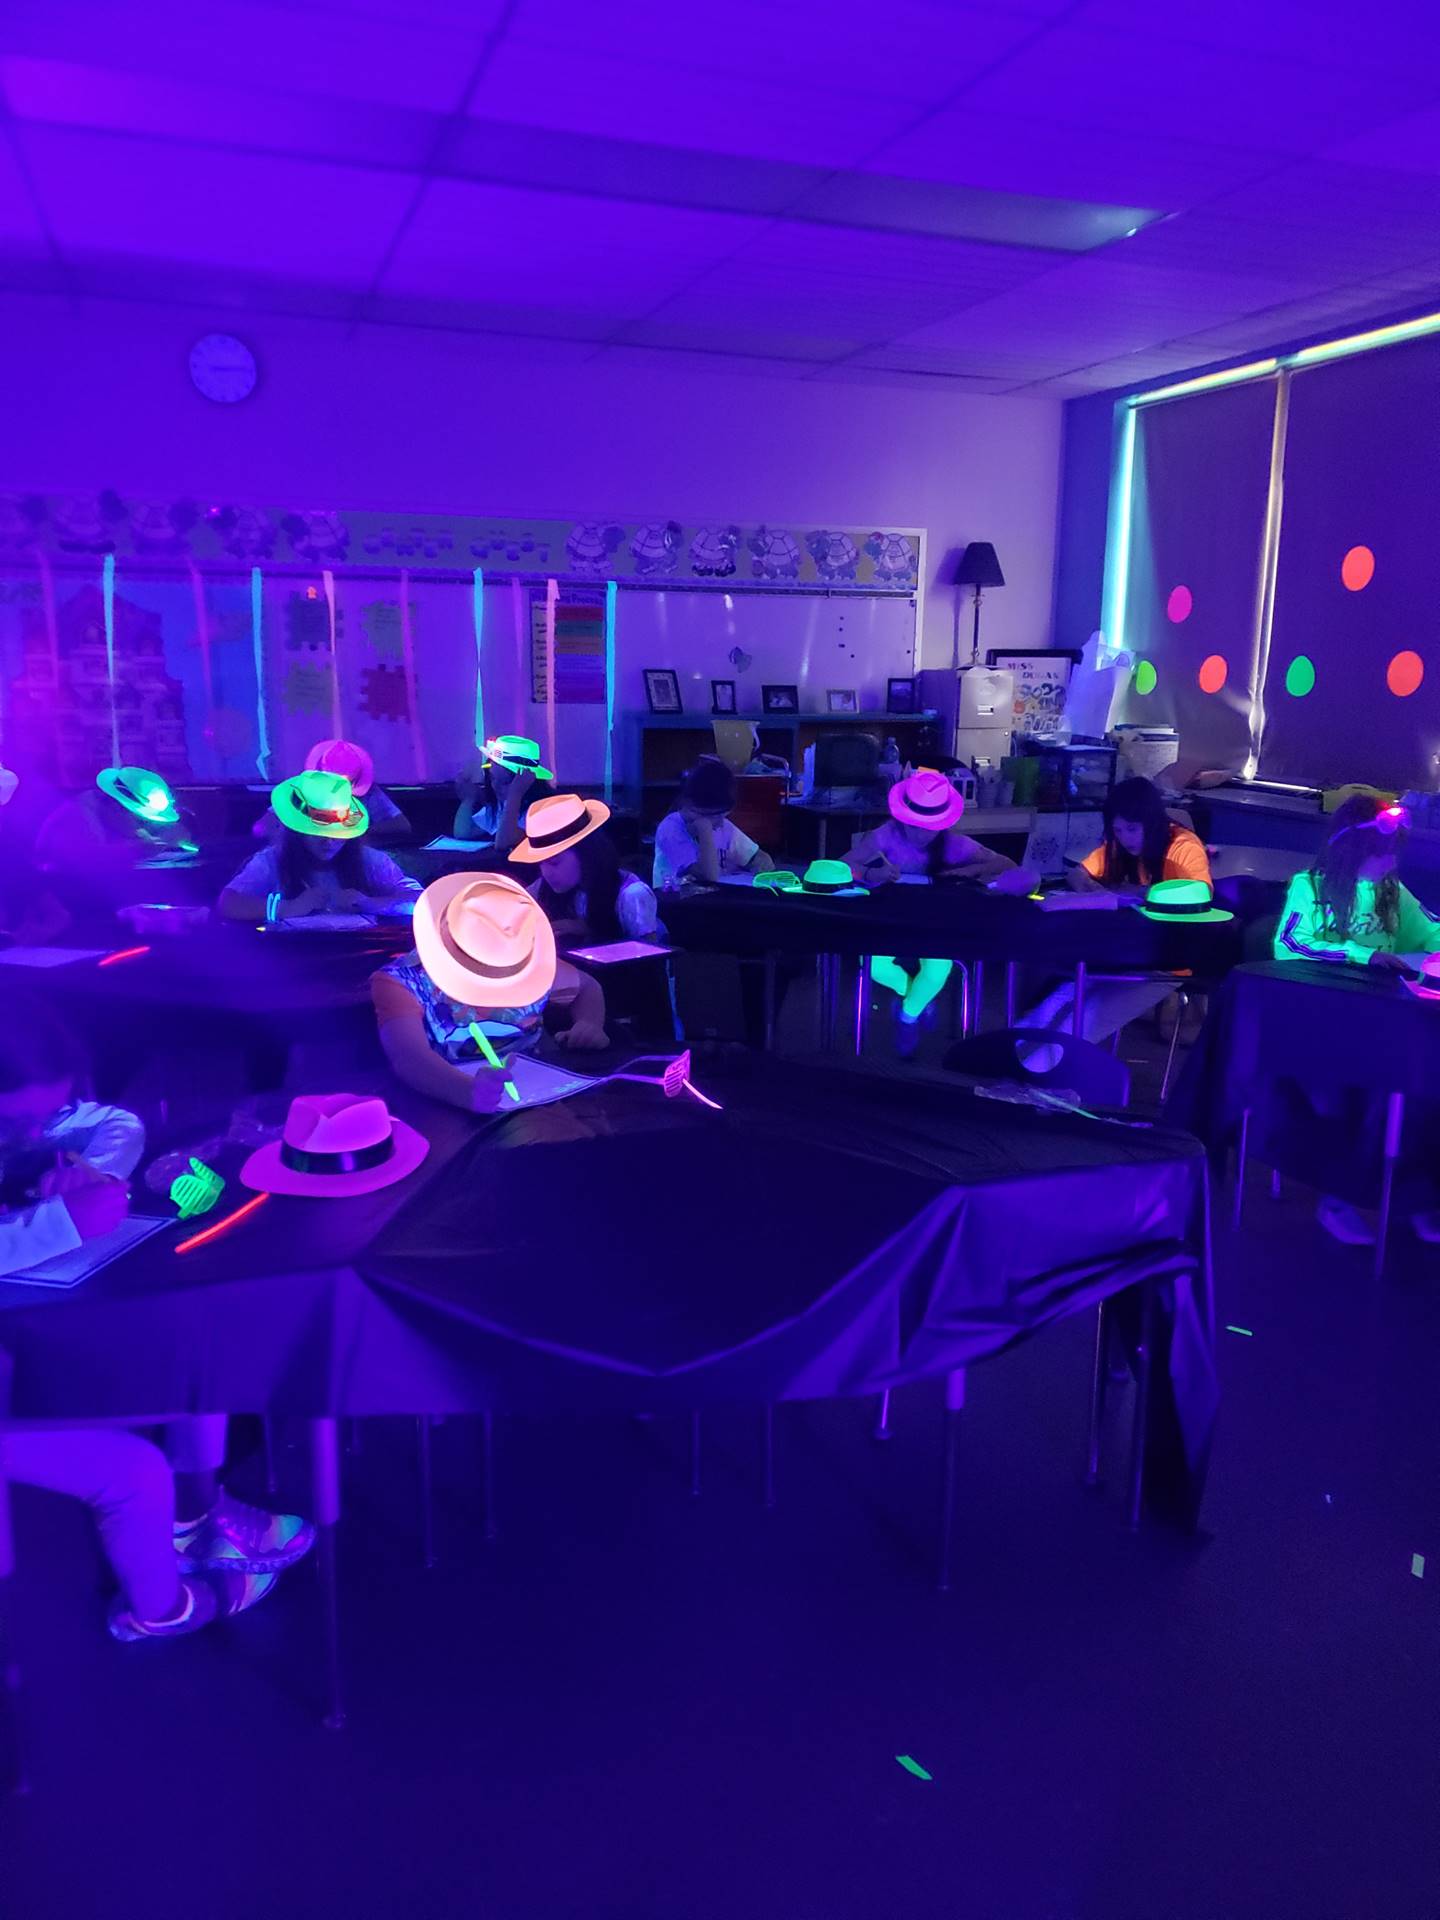 3B earns a Glow day by completing their Reading challenge